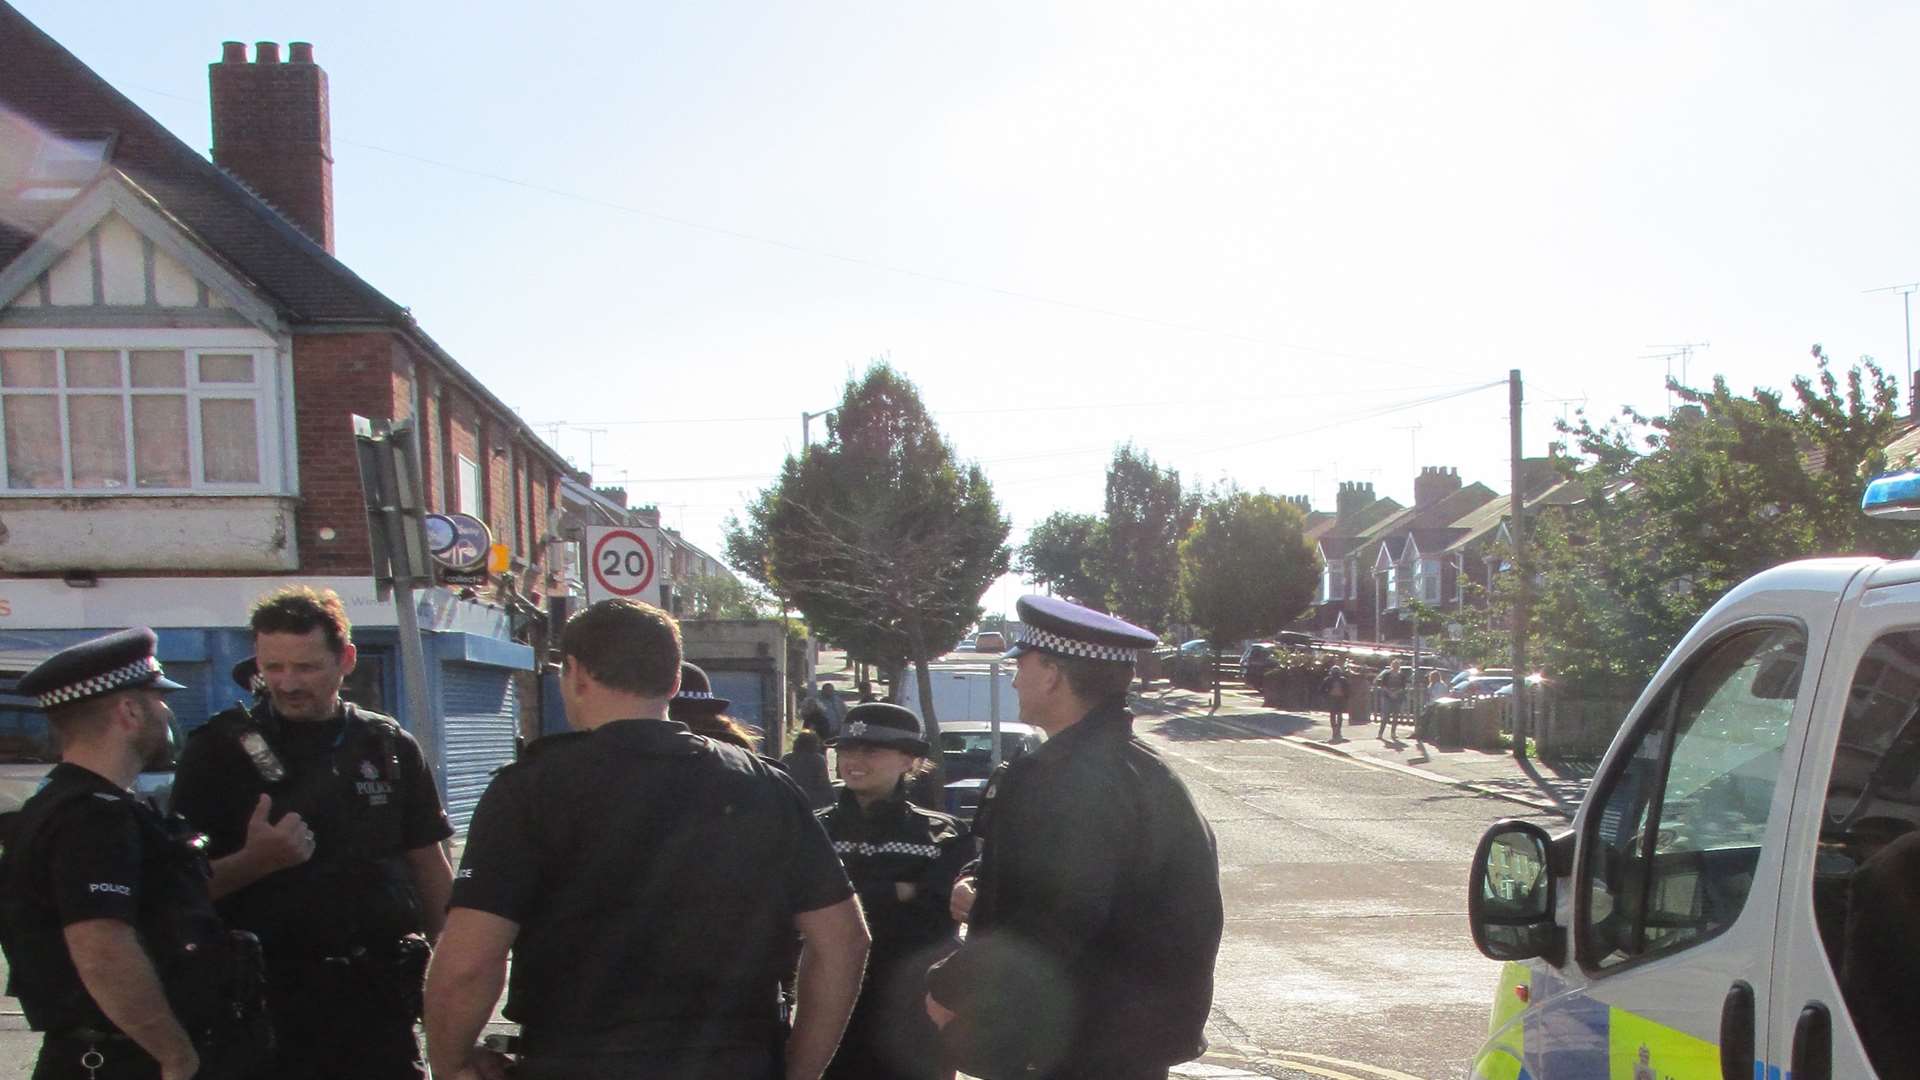 The scene of the anti-rogue trader raid at Ingoldsby Road, Folkestone,